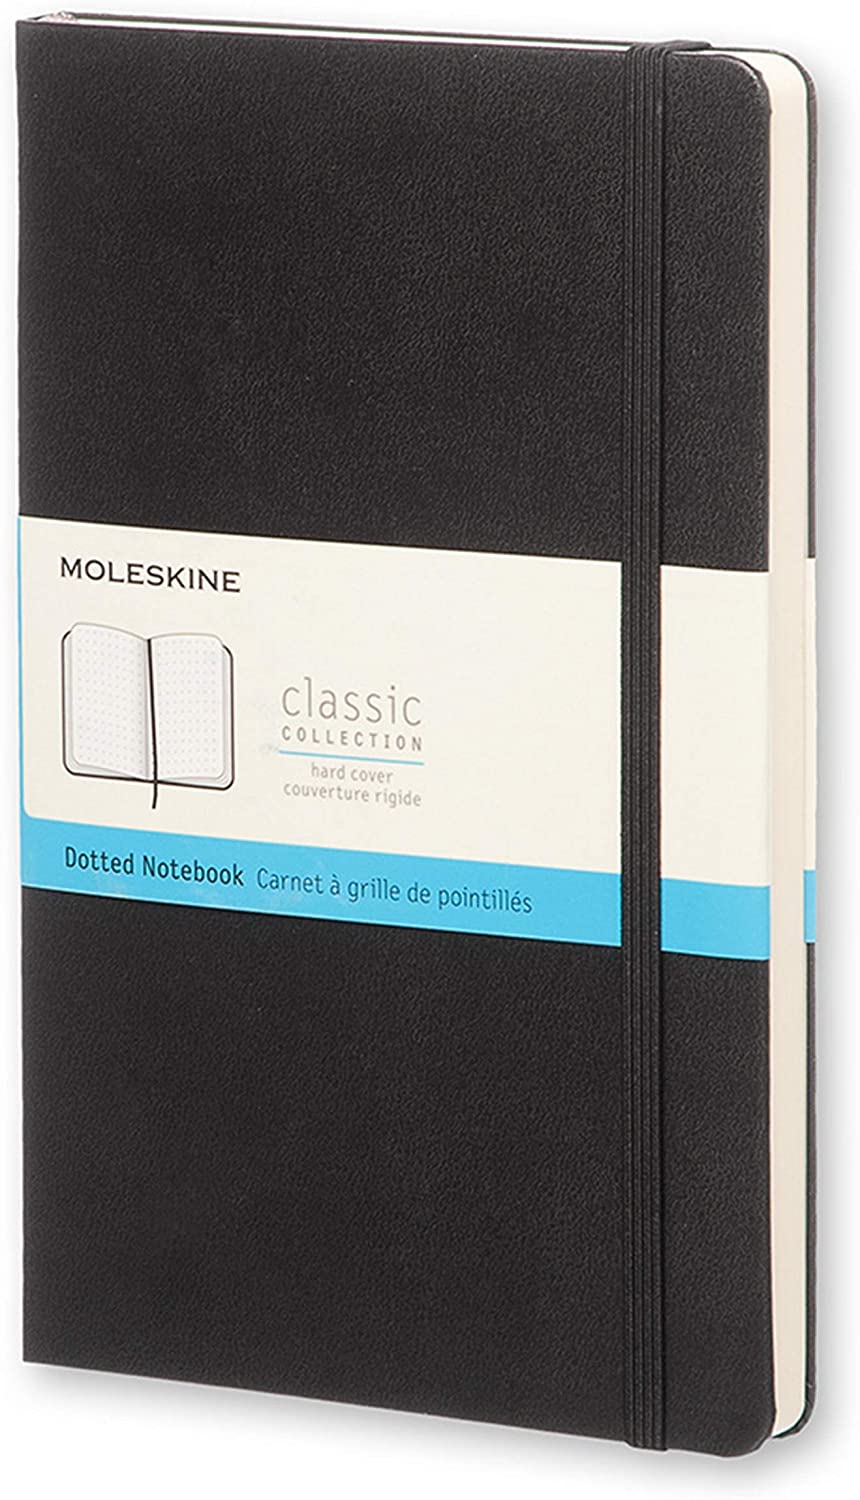 Moleskine Classic Notebook Black available for online shopping in Pakistan at Chapters Bookstore